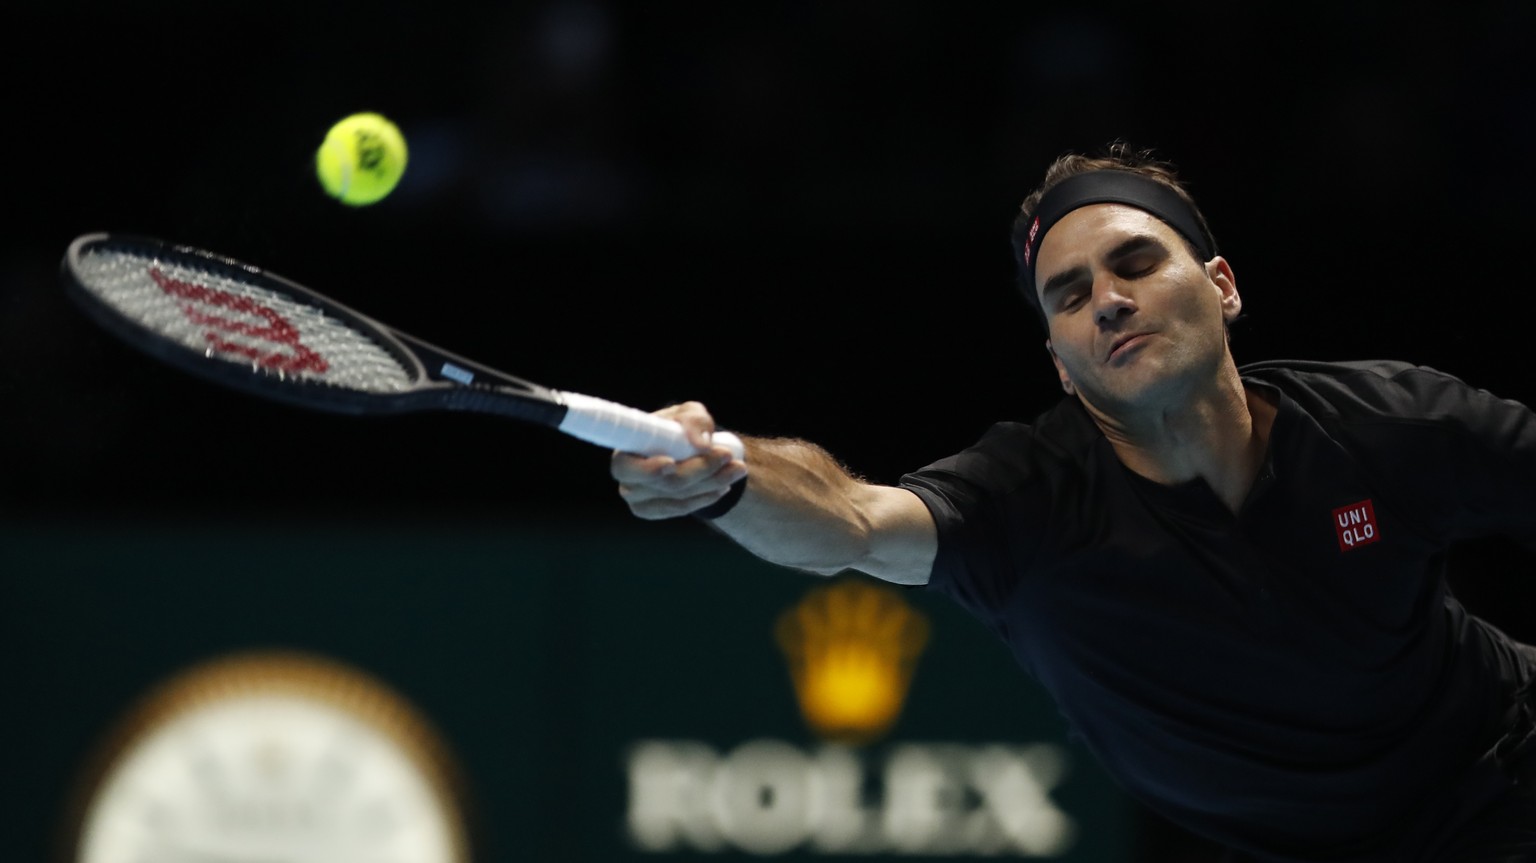 Switzerland&#039;s Roger Federer plays a return to Austria&#039;s Dominic Thiem during their ATP World Tour Finals singles tennis match at the O2 Arena in London, Sunday, Nov. 10, 2019. (AP Photo/Alas ...